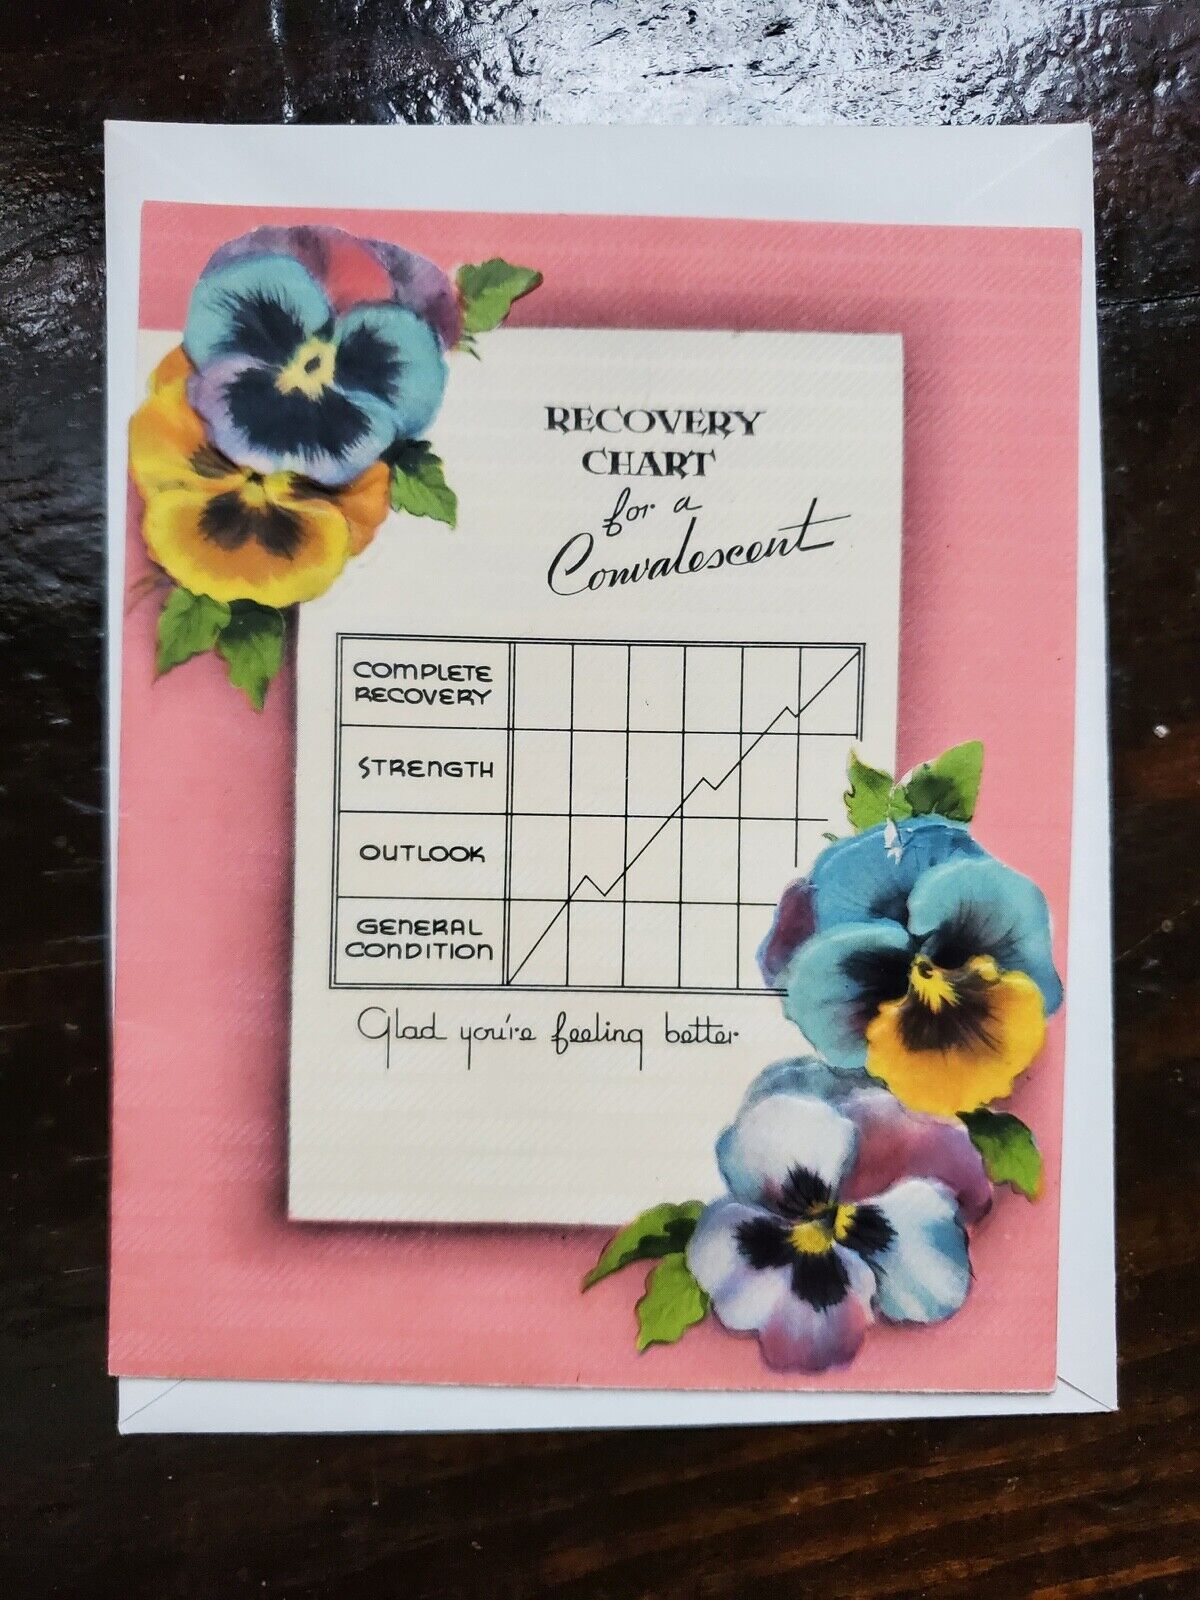 Vintage c1940s Sick Get Well Greeting Card Recovery Chart \